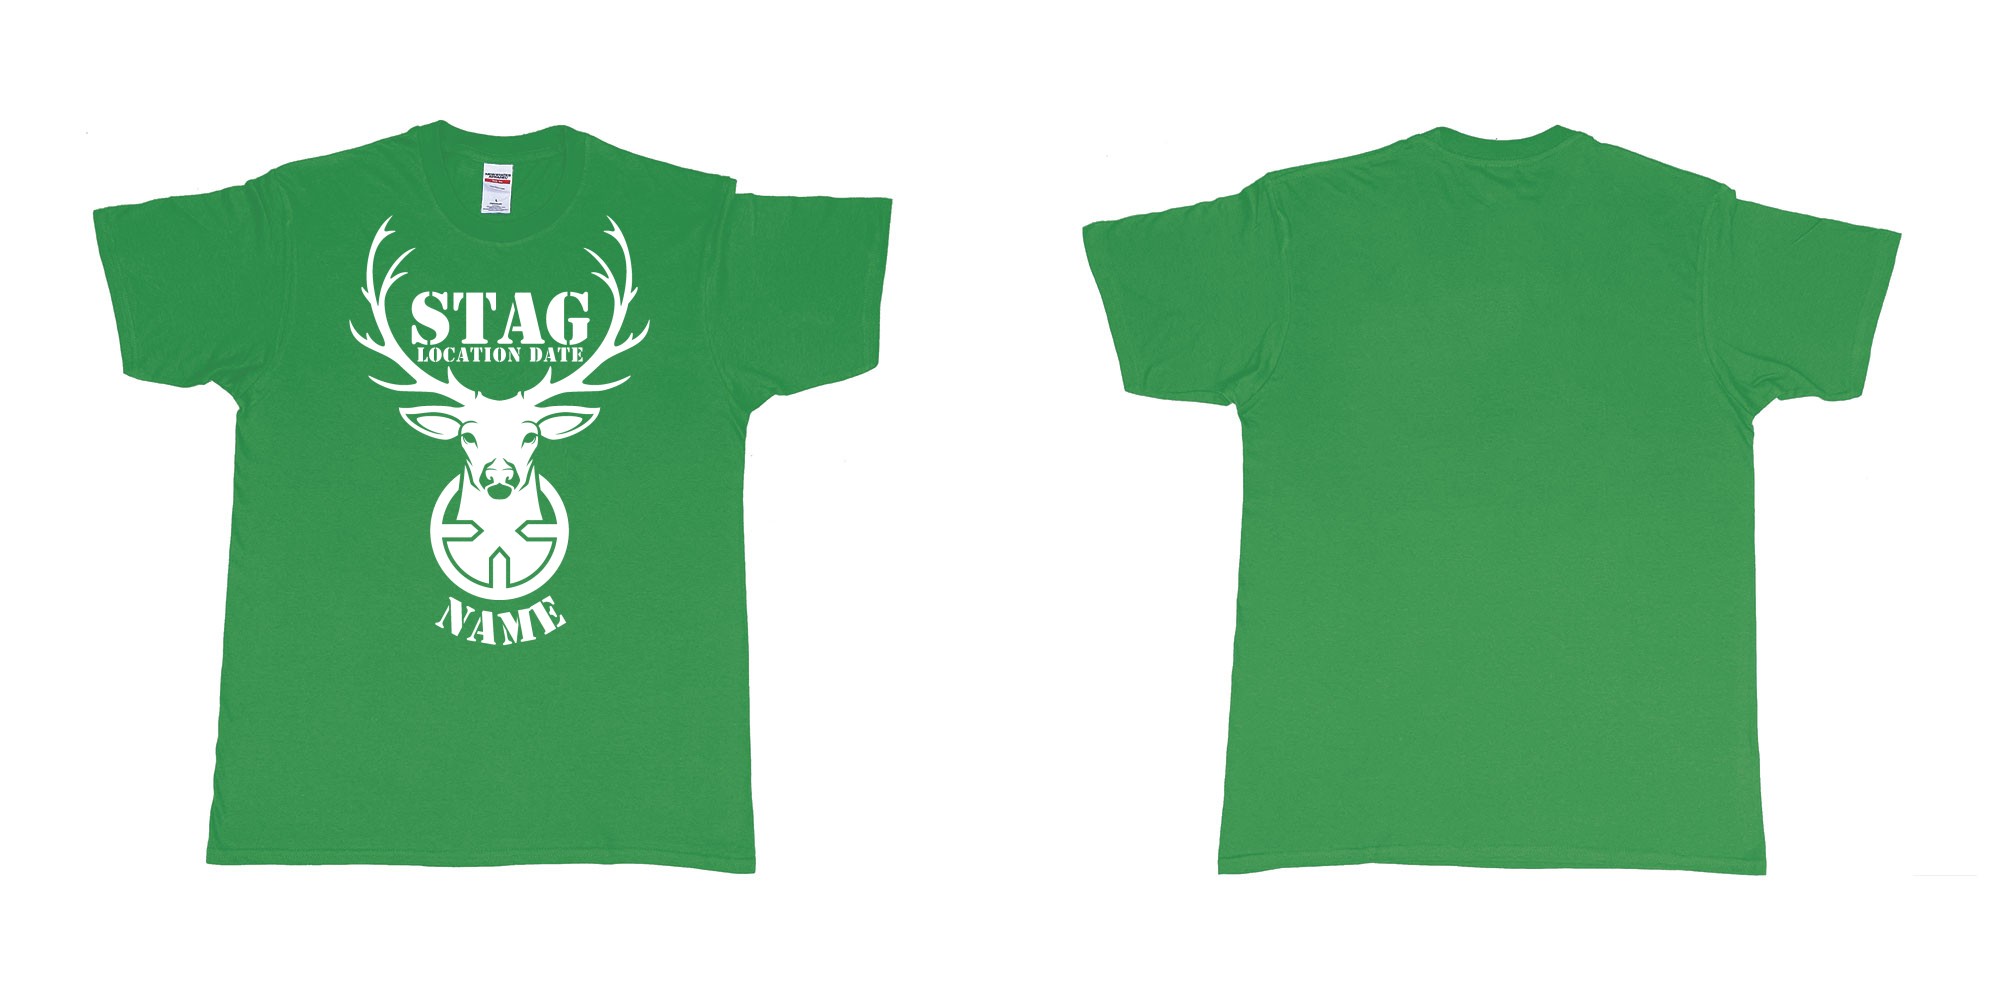 Custom tshirt design aiming for a stag custom tshirt print in fabric color irish-green choice your own text made in Bali by The Pirate Way